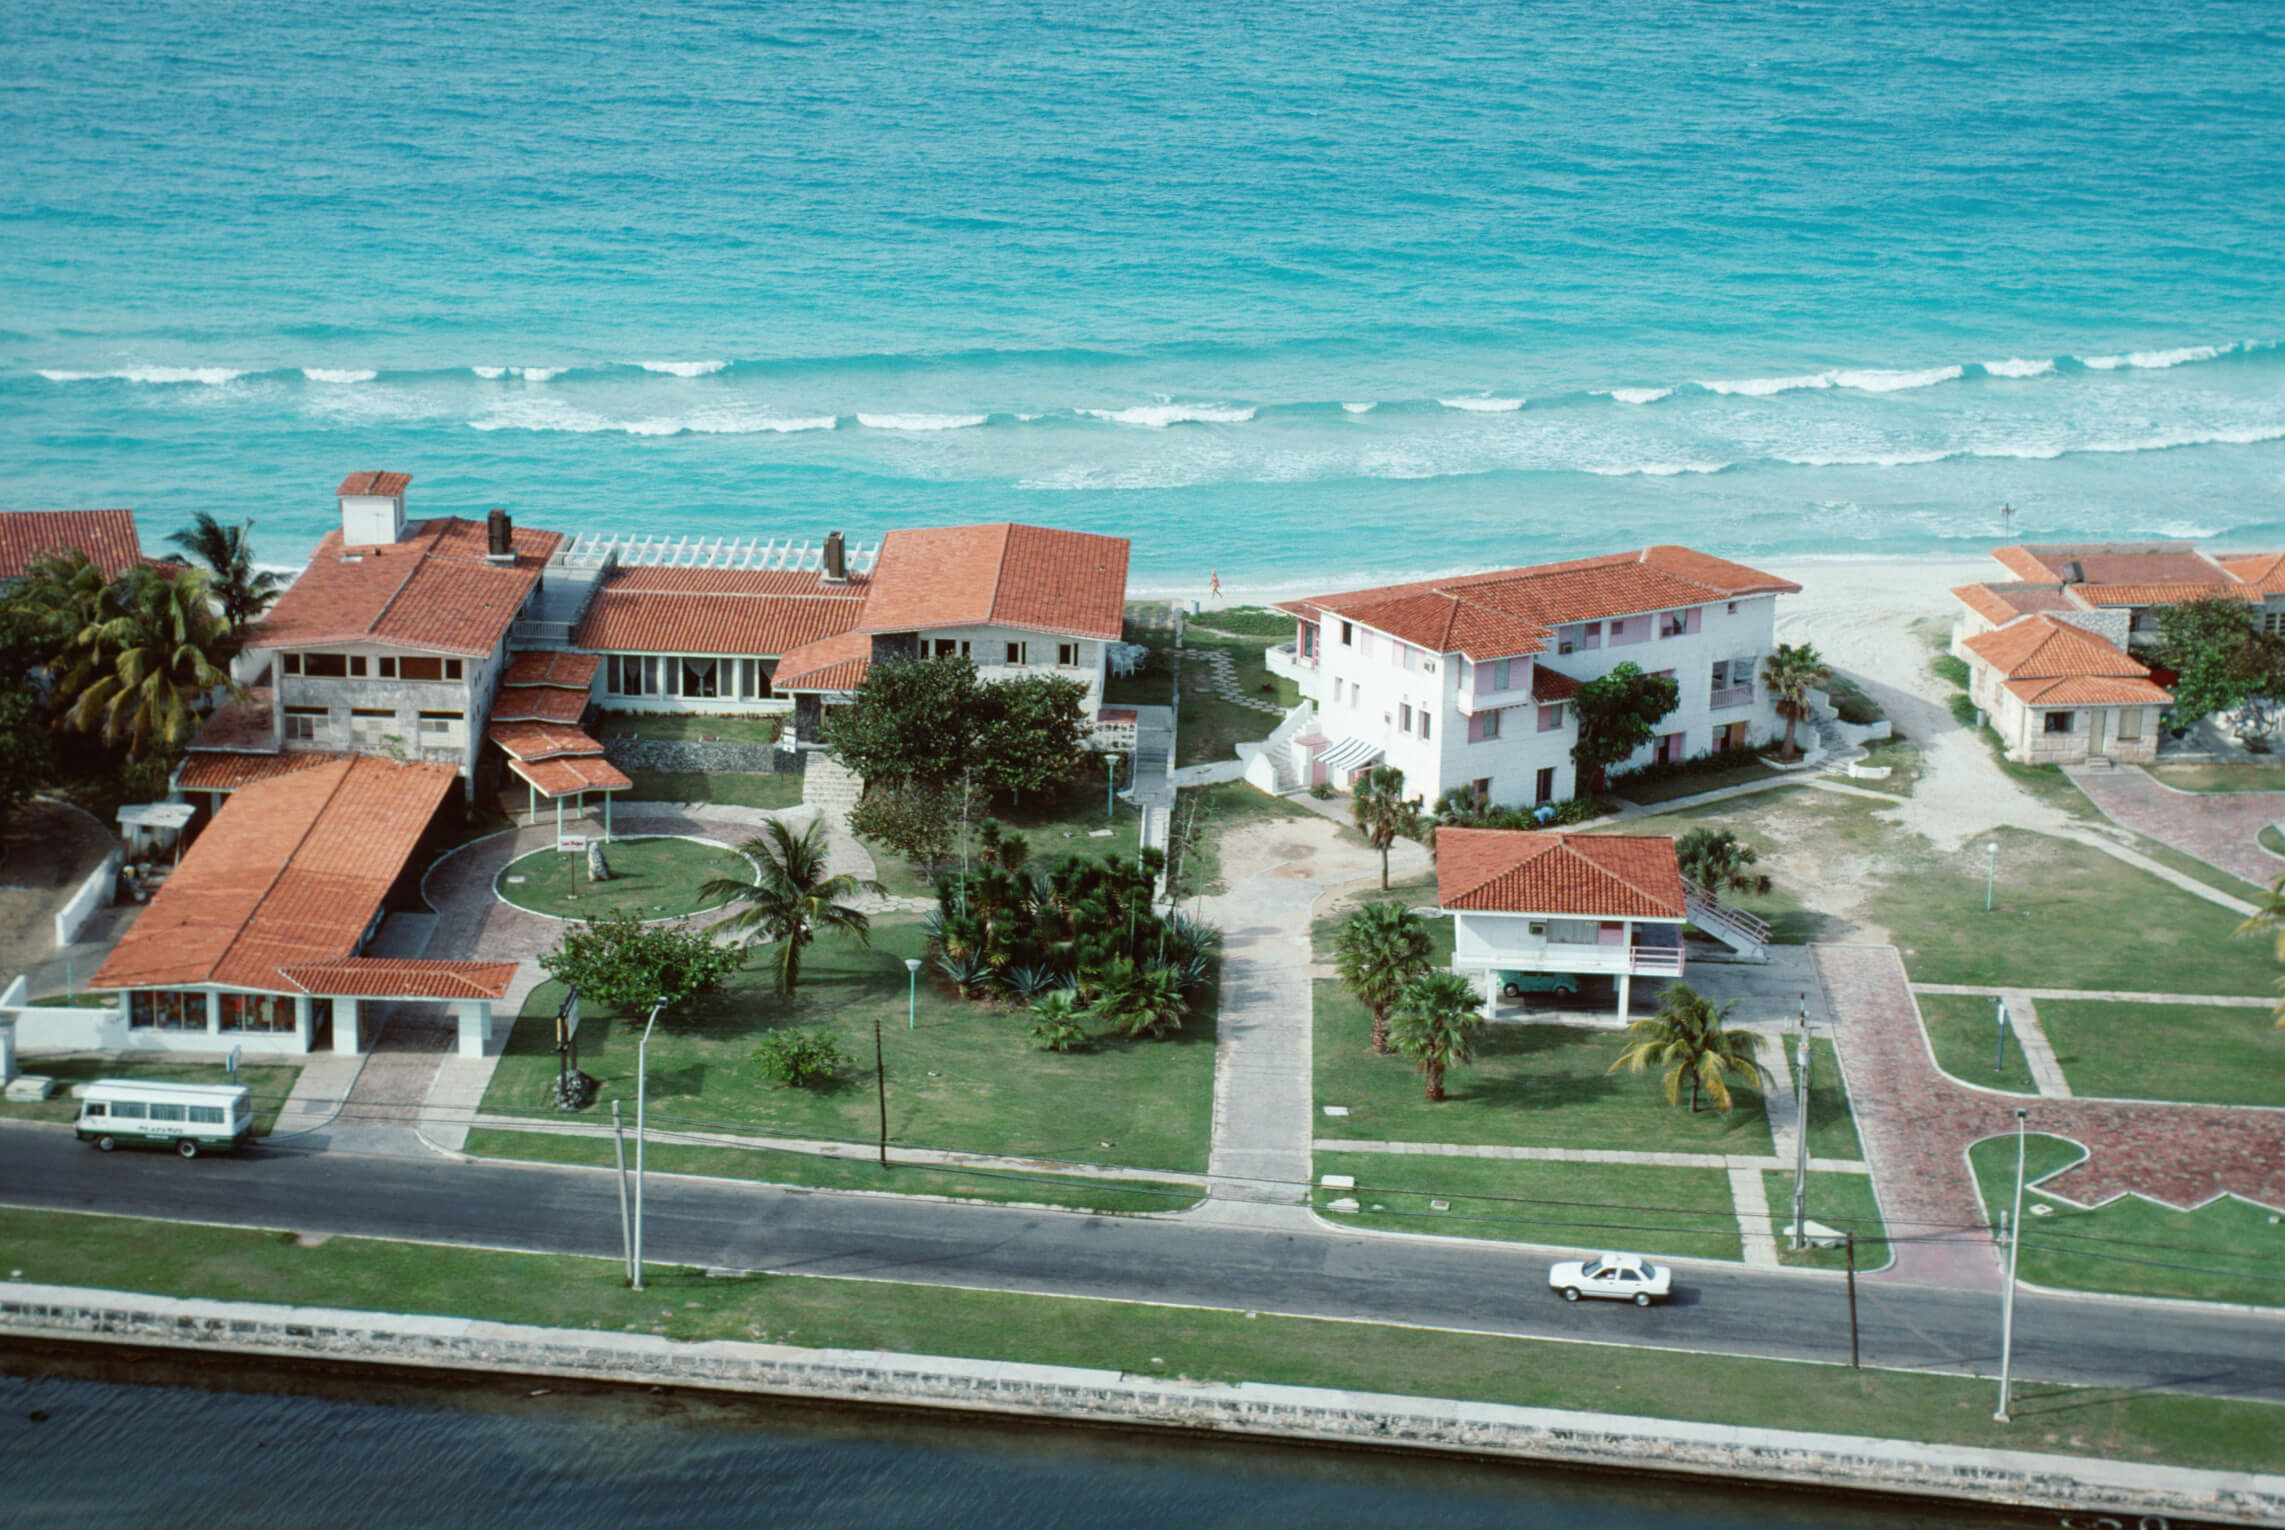 Deeded Timeshare Foreclosure: How It Affects You (Plus Ways To Avoid It)